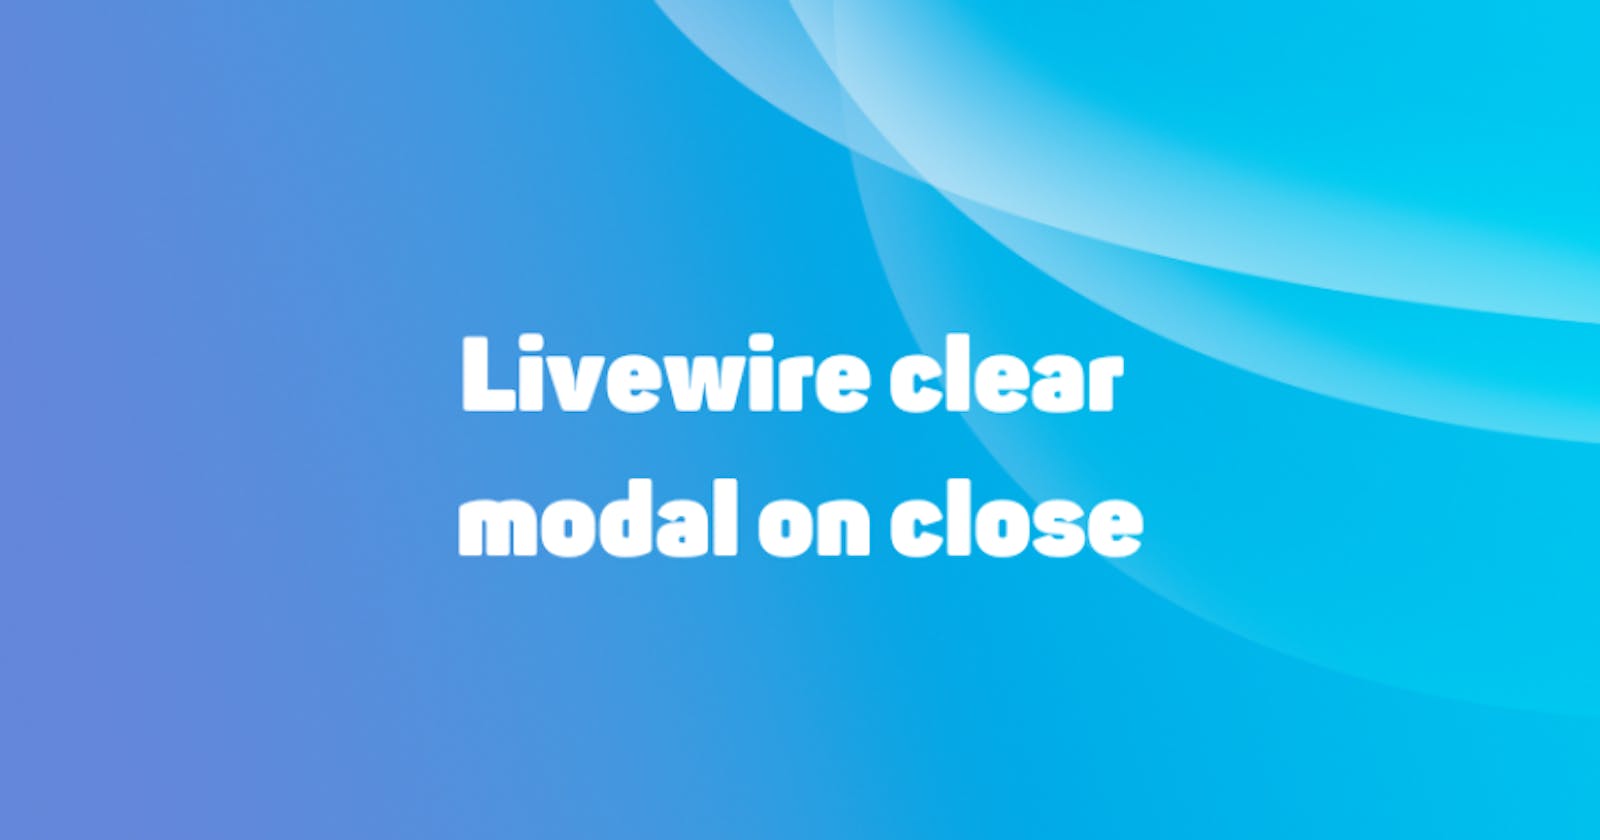 Livewire clear modal on close